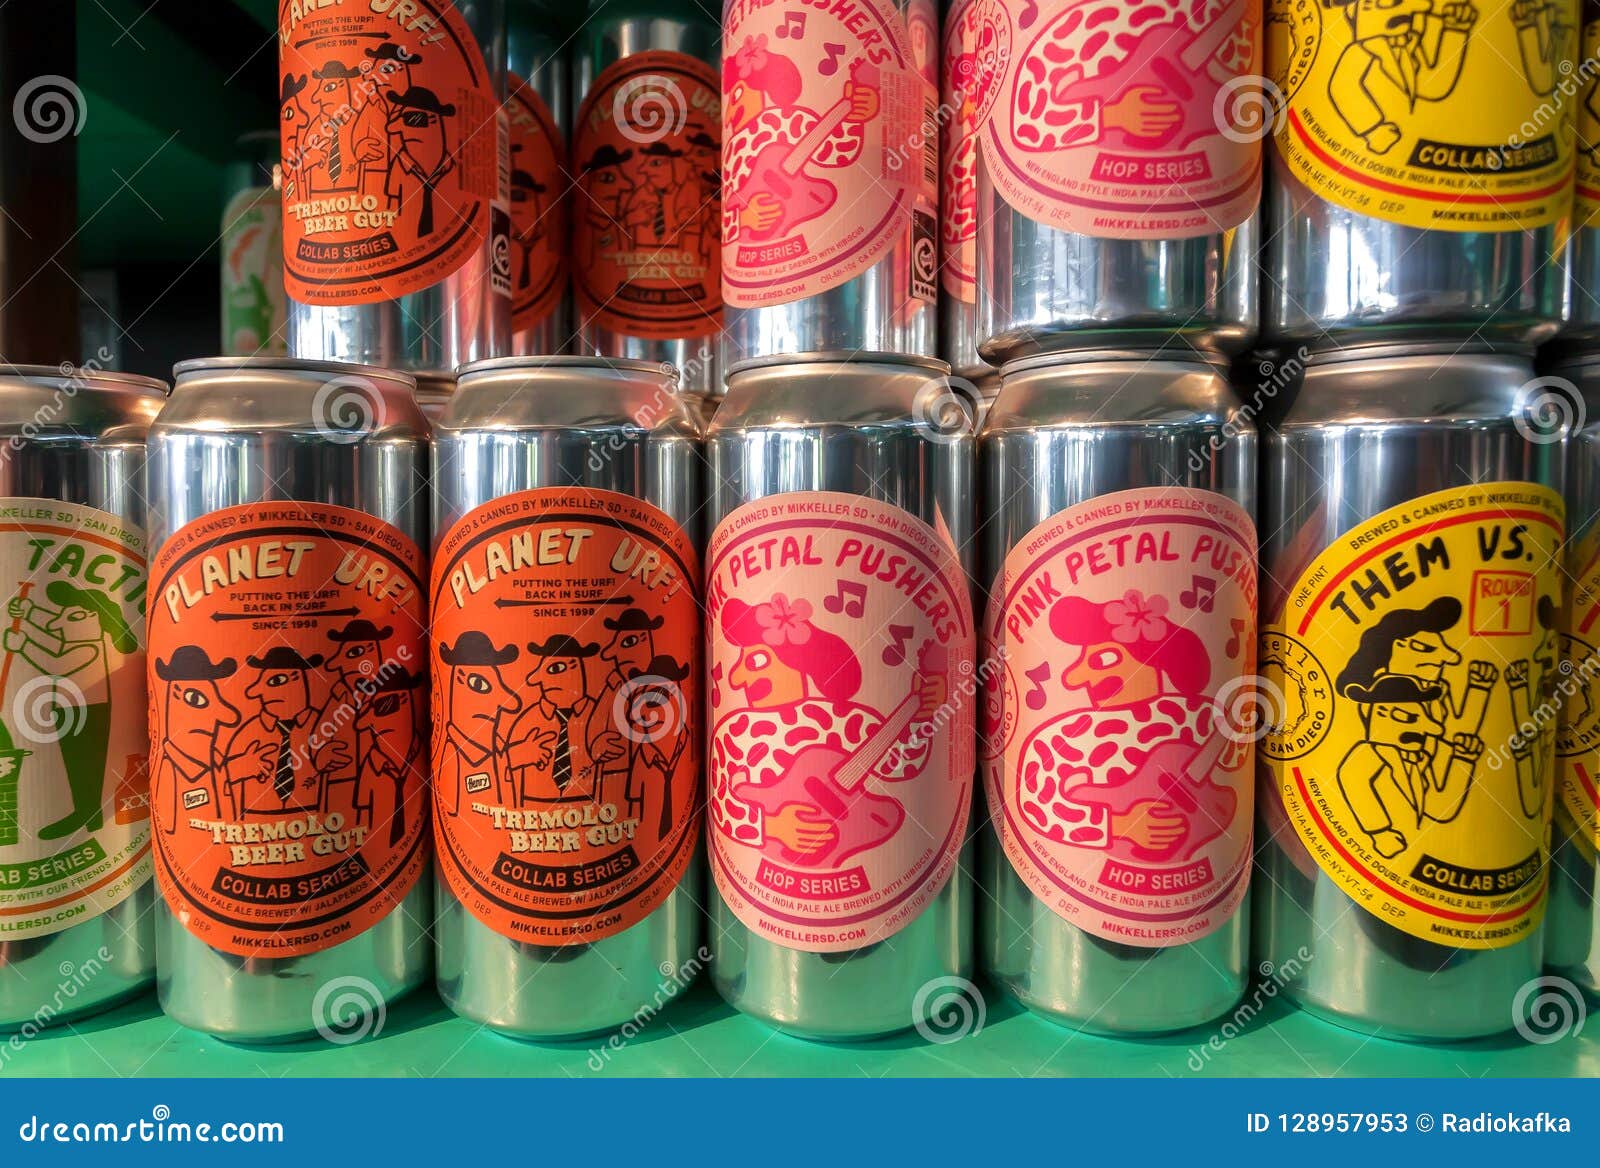 chance Polering cyklus Colorful Design of Popular Danish Beer by Mikkeller Brewery on Many Cans of  Drinks Editorial Stock Photo - Image of brew, business: 128957953